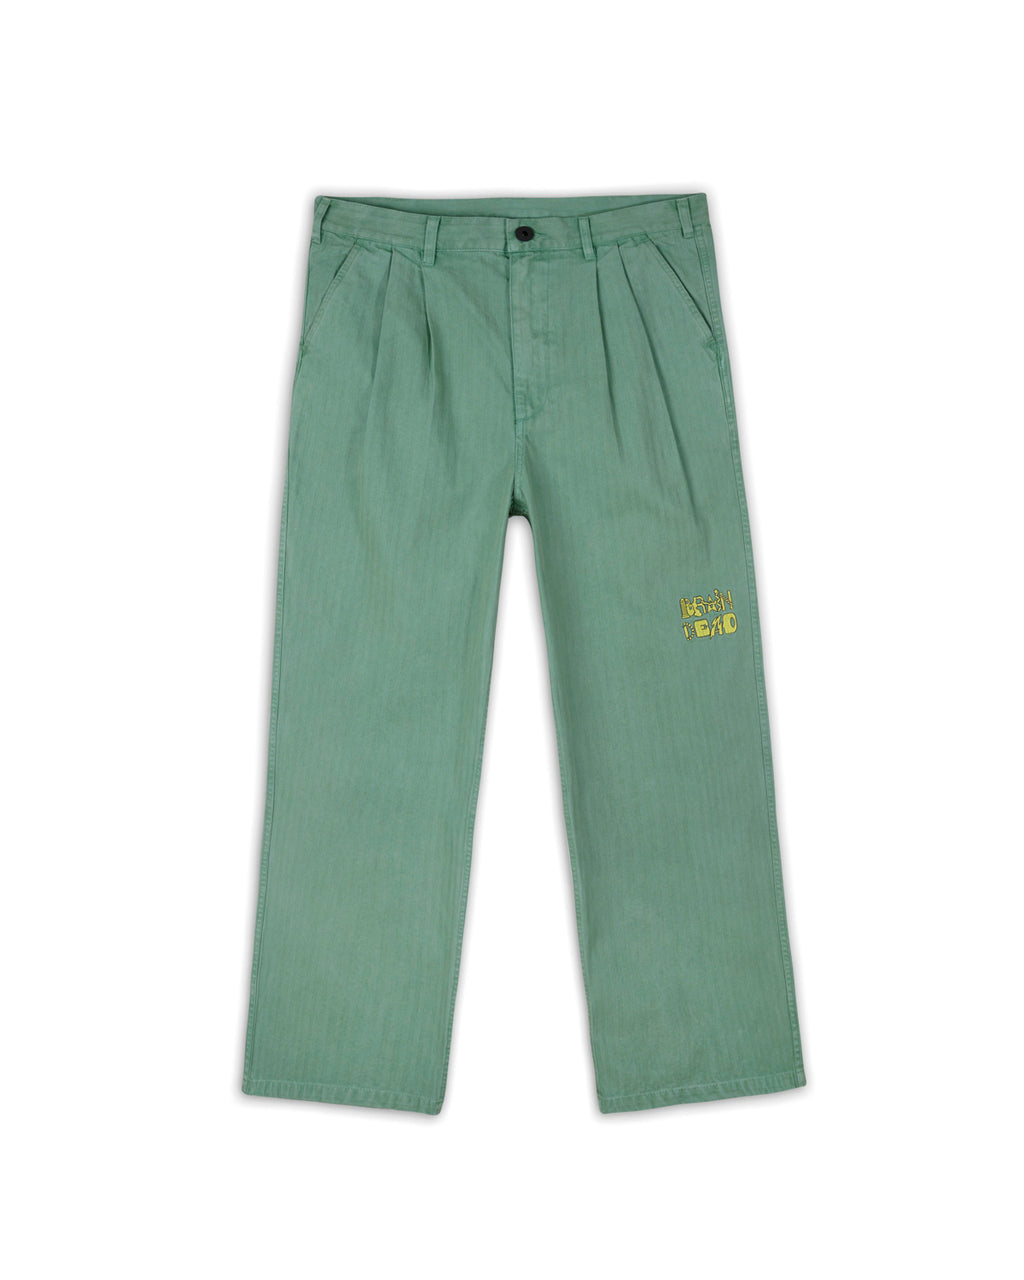 Connections Herringbone Pant - Putty 1